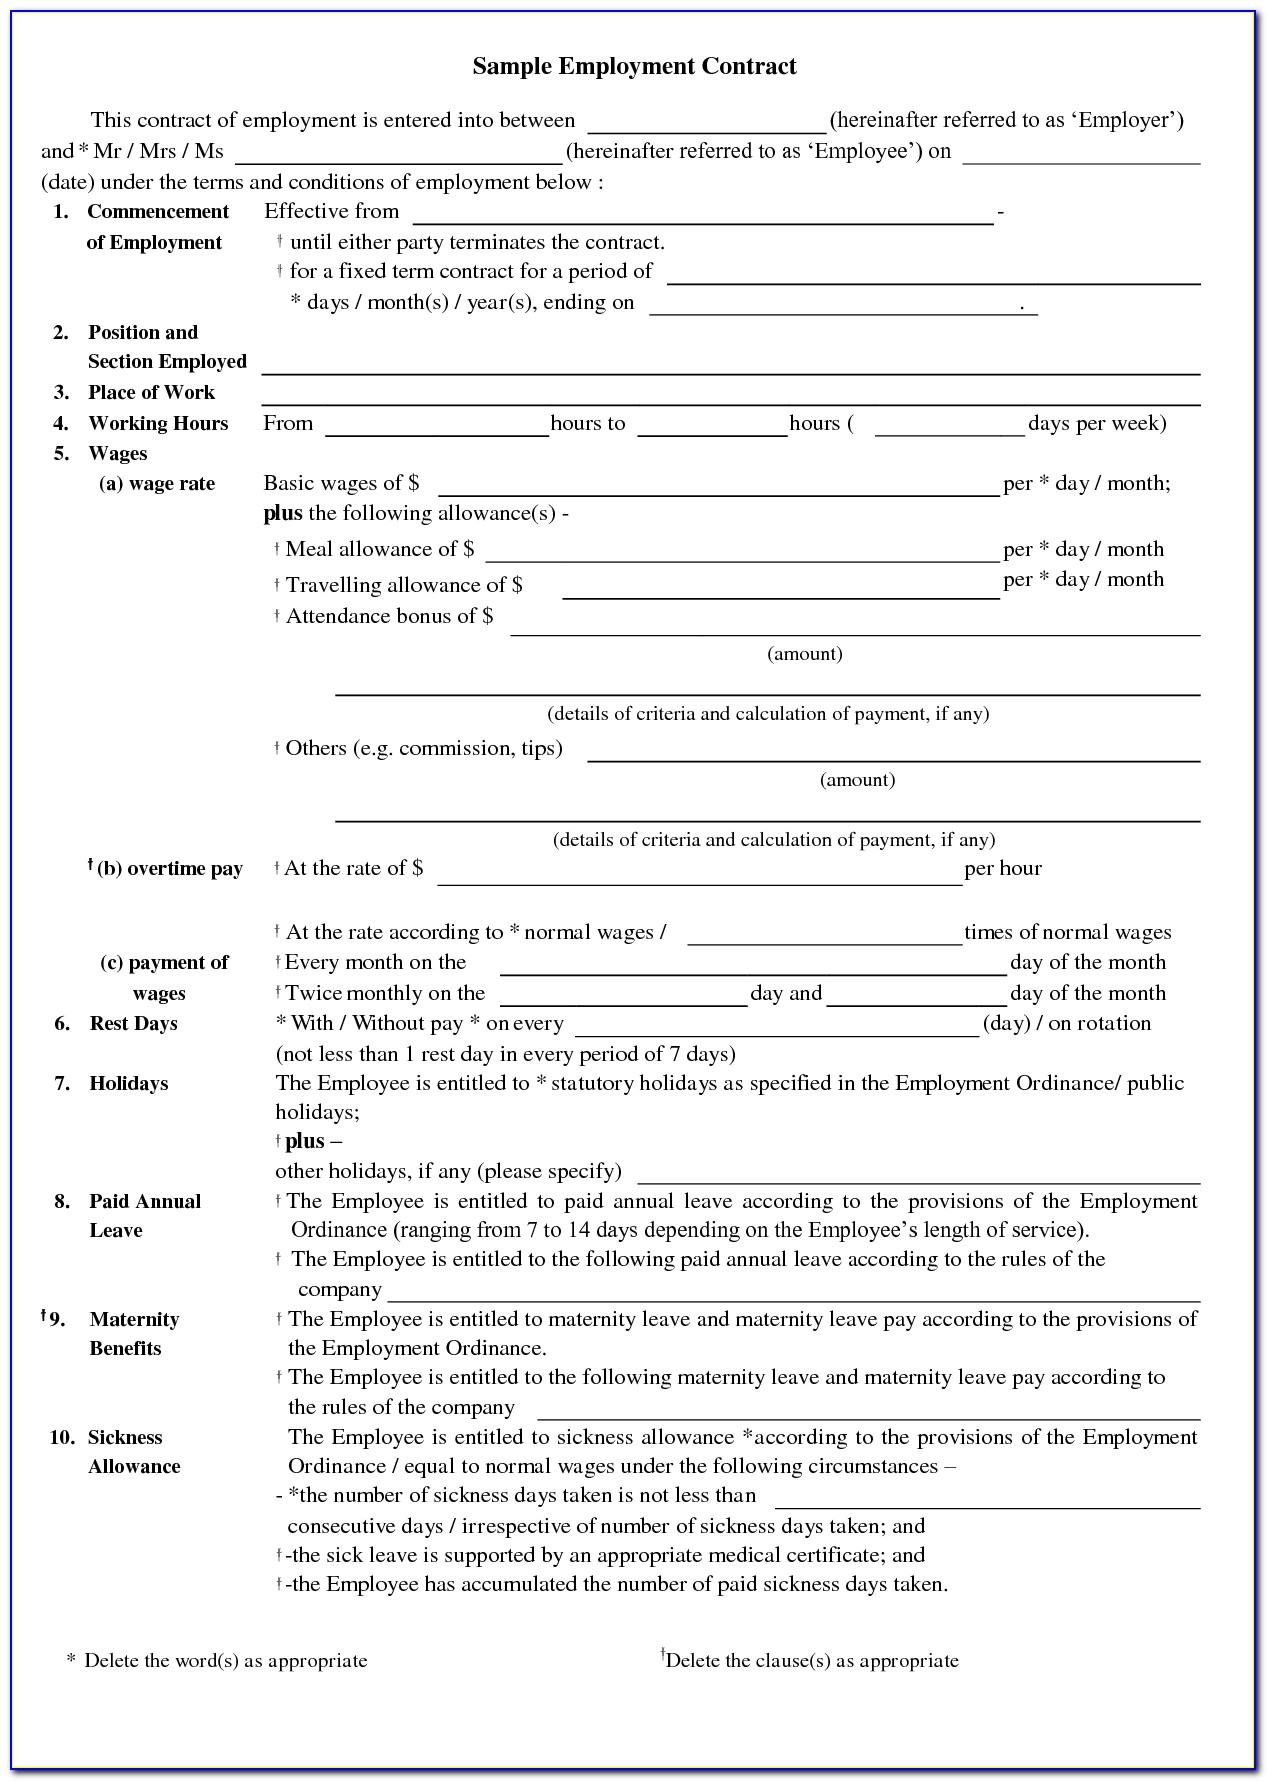 Labor Supply Contract Agreement Sample